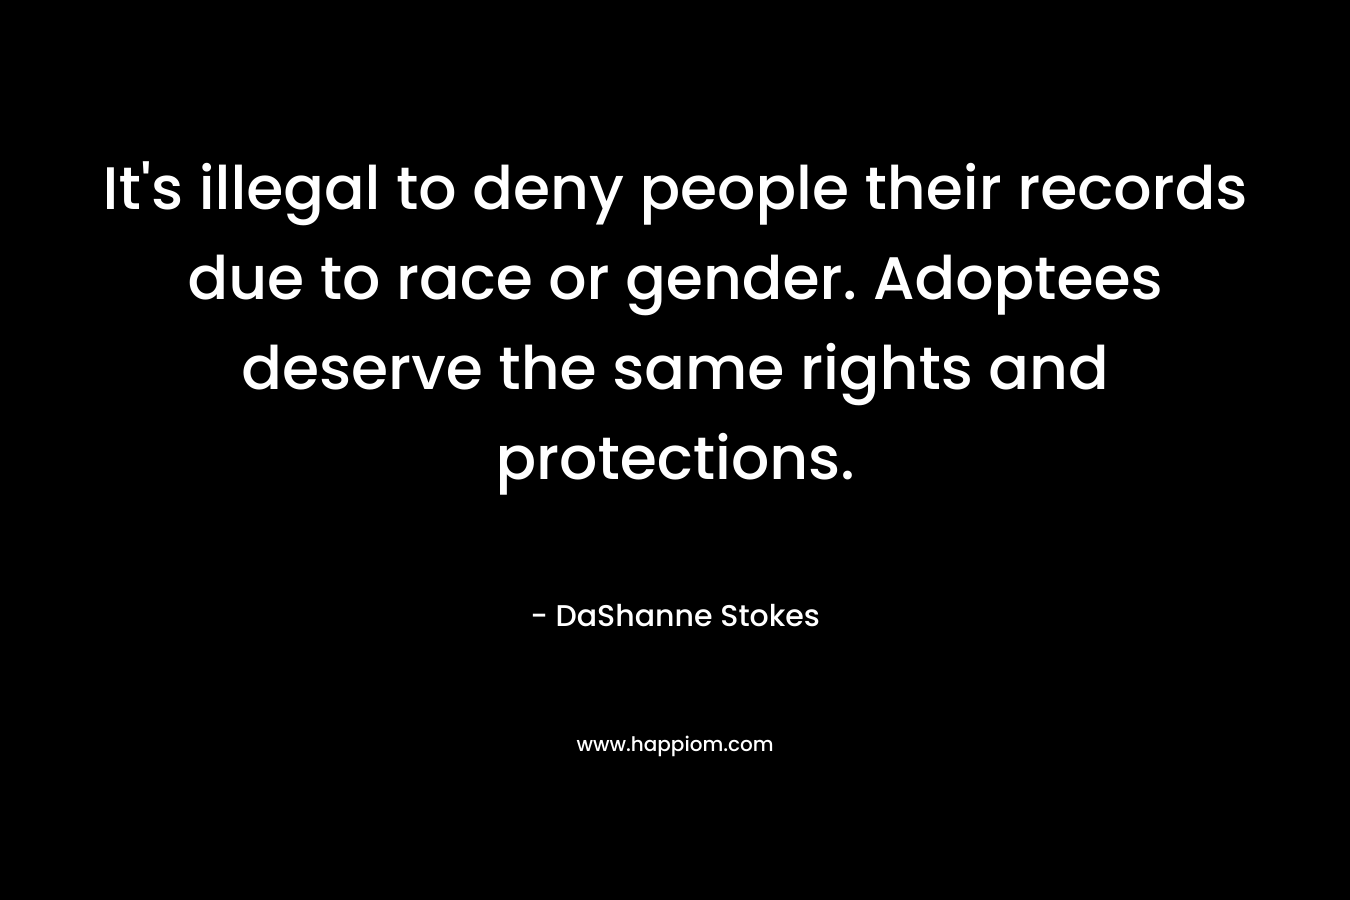 It’s illegal to deny people their records due to race or gender. Adoptees deserve the same rights and protections. – DaShanne Stokes